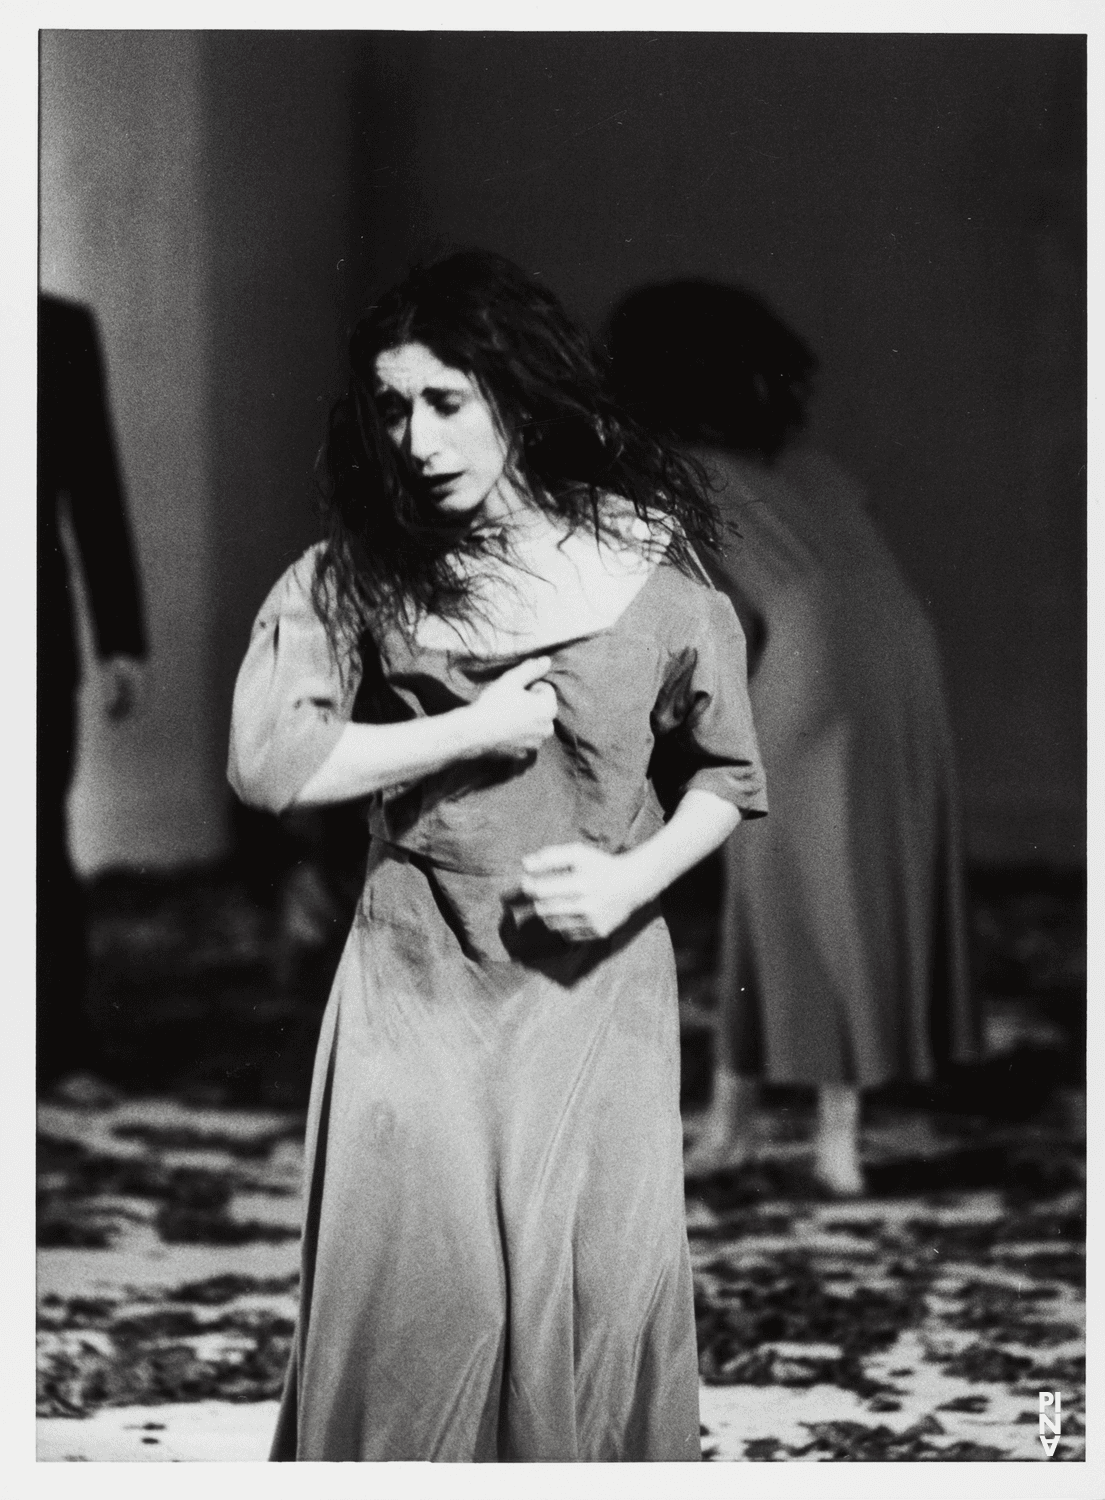 Beatrice Libonati in “Bluebeard. While Listening to a Tape Recording of Béla Bartók's Opera "Duke Bluebeard's Castle"” by Pina Bausch